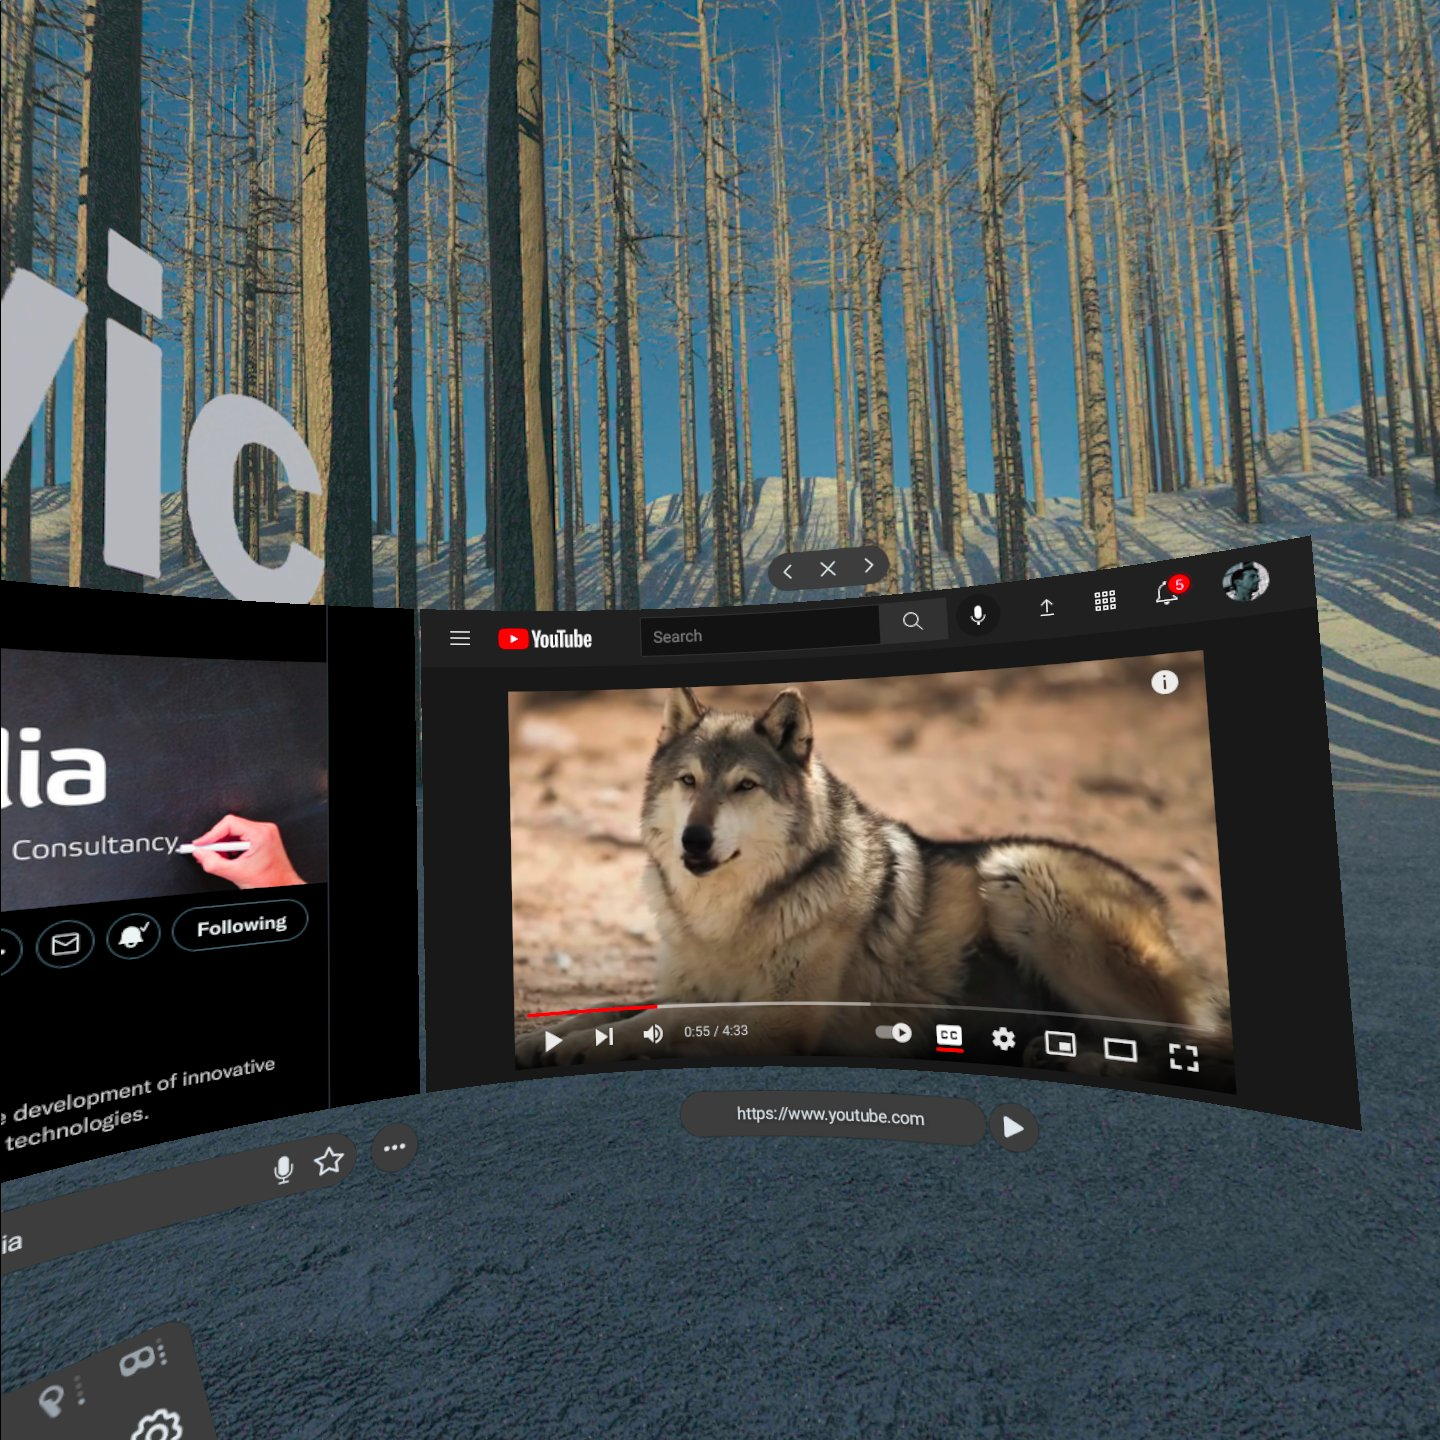 screenshot of wolvic browser in Oculus Quest 2 with two browser windows, Igalia's website and a video about Wolves on YouTube